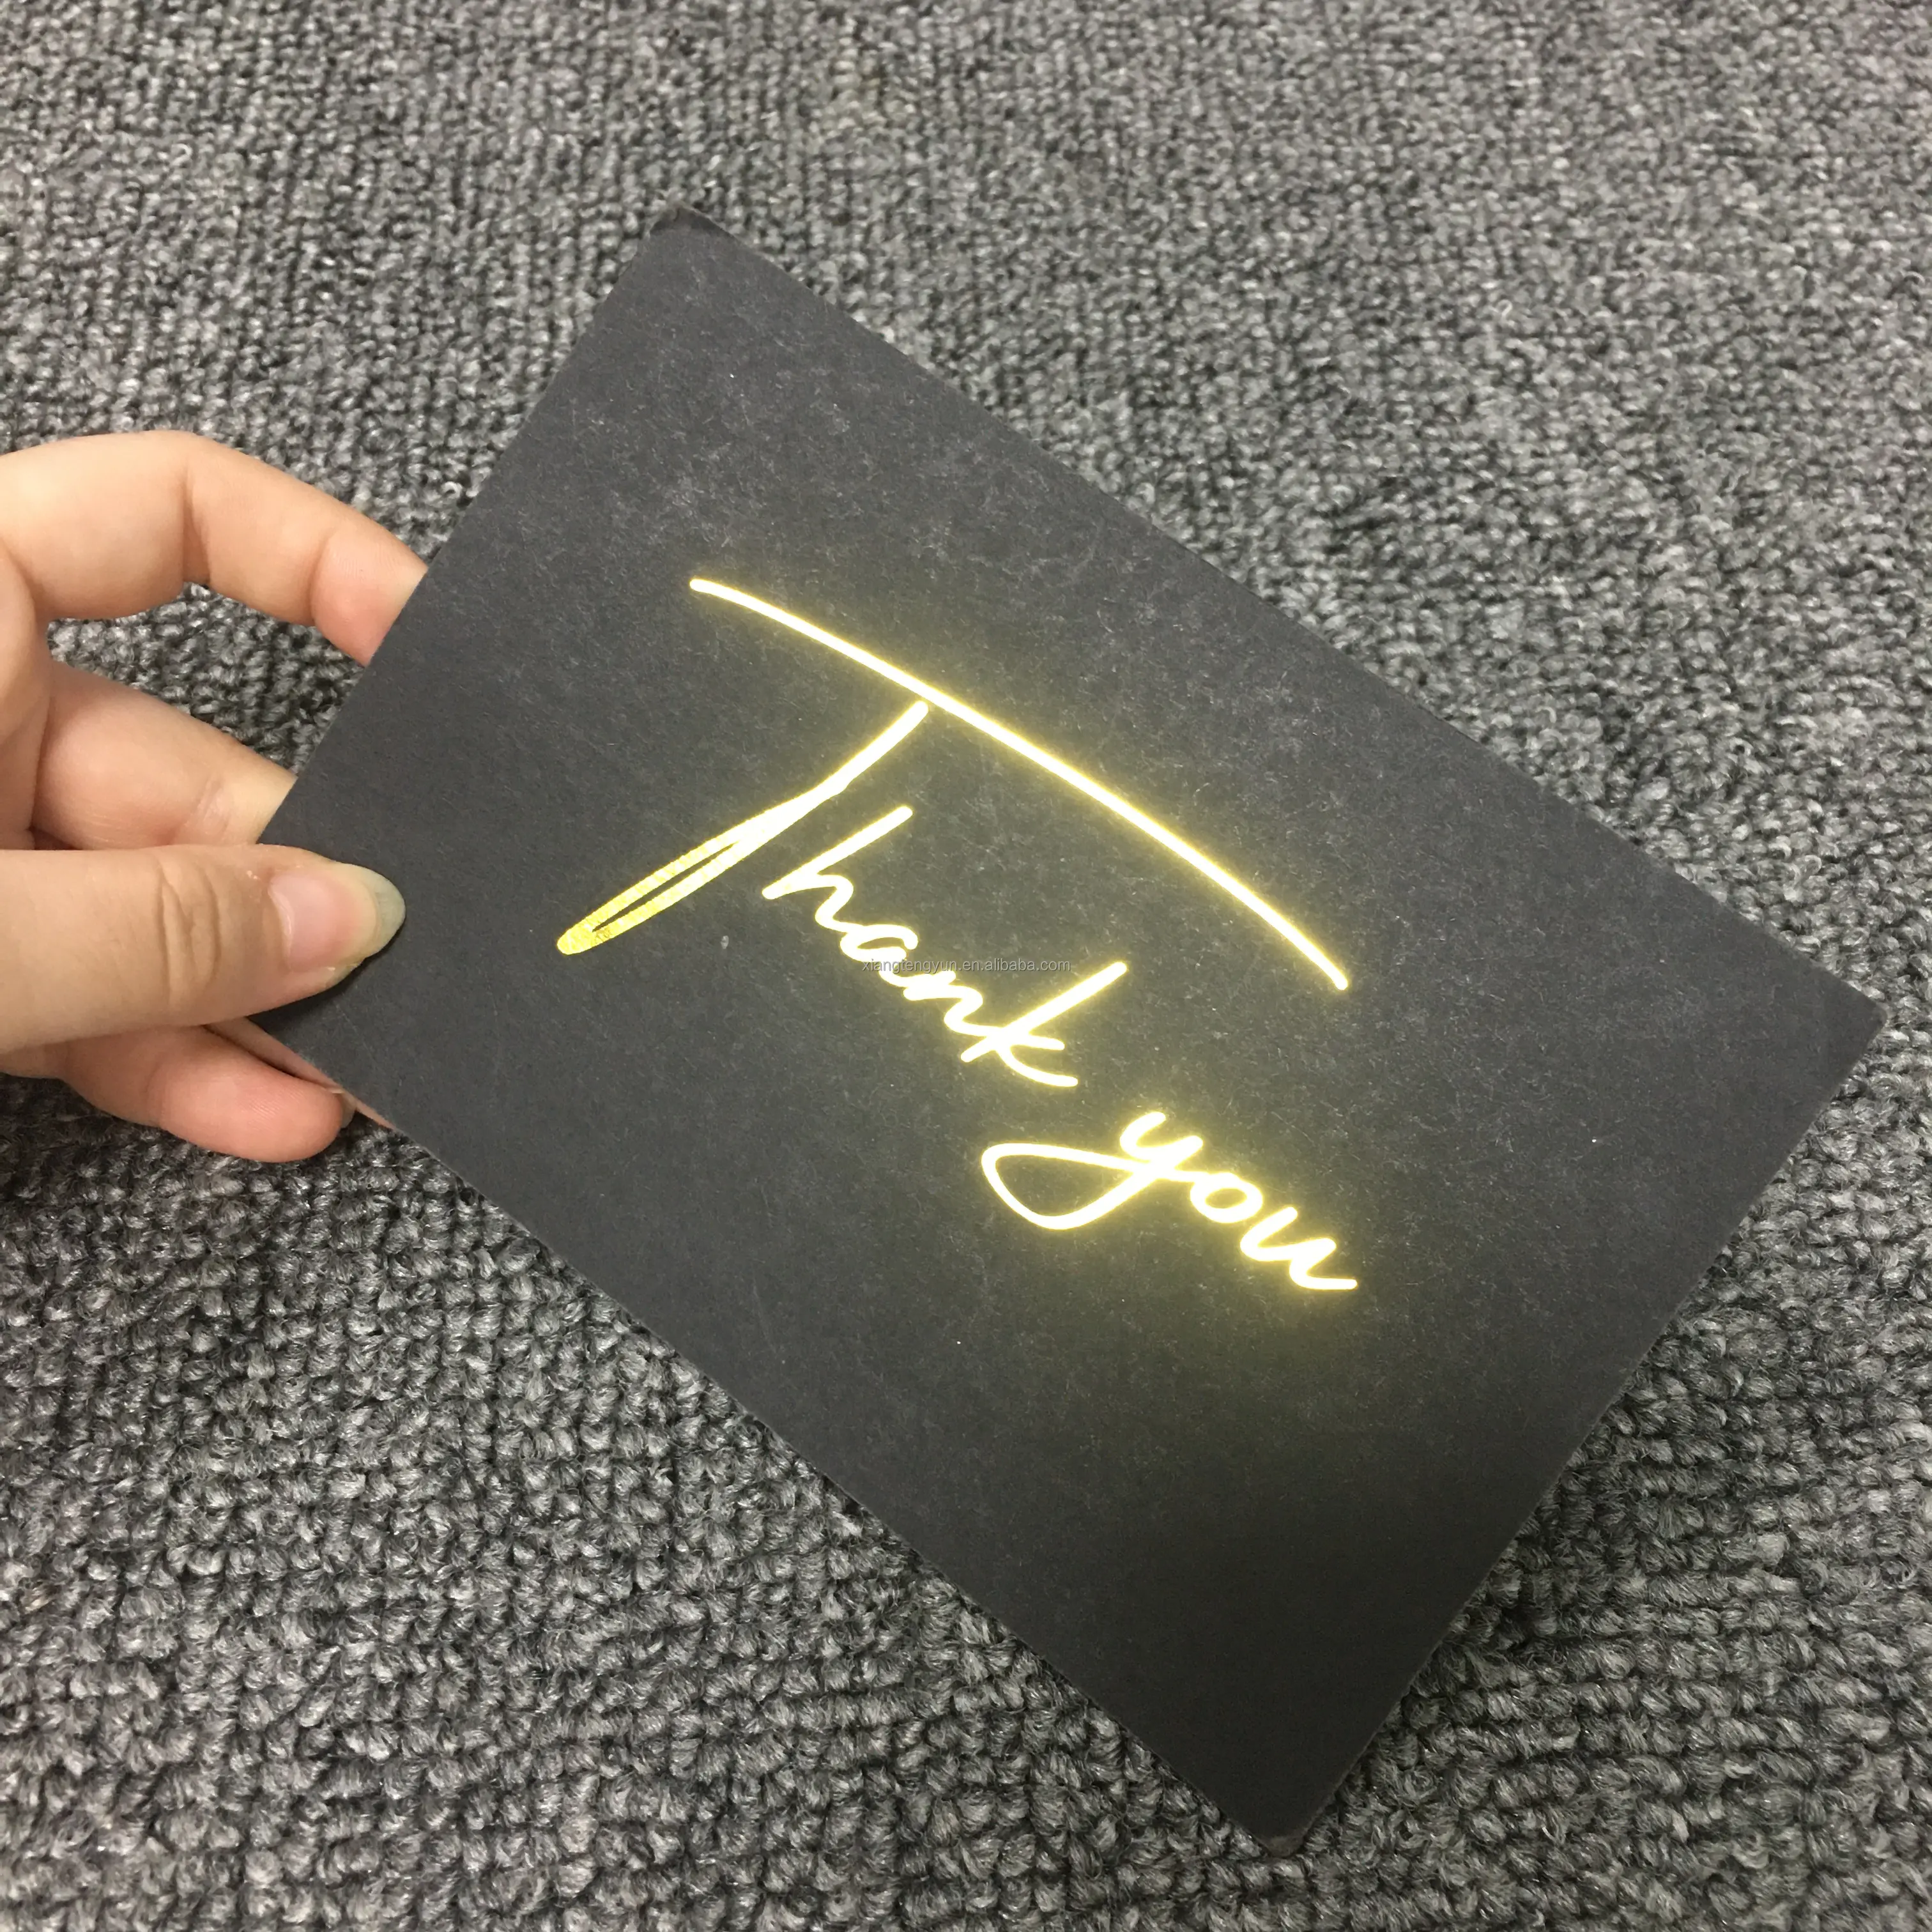 Get 5 Star Reviews Cheap Good Quality Product Insert Amazon Thank You Card